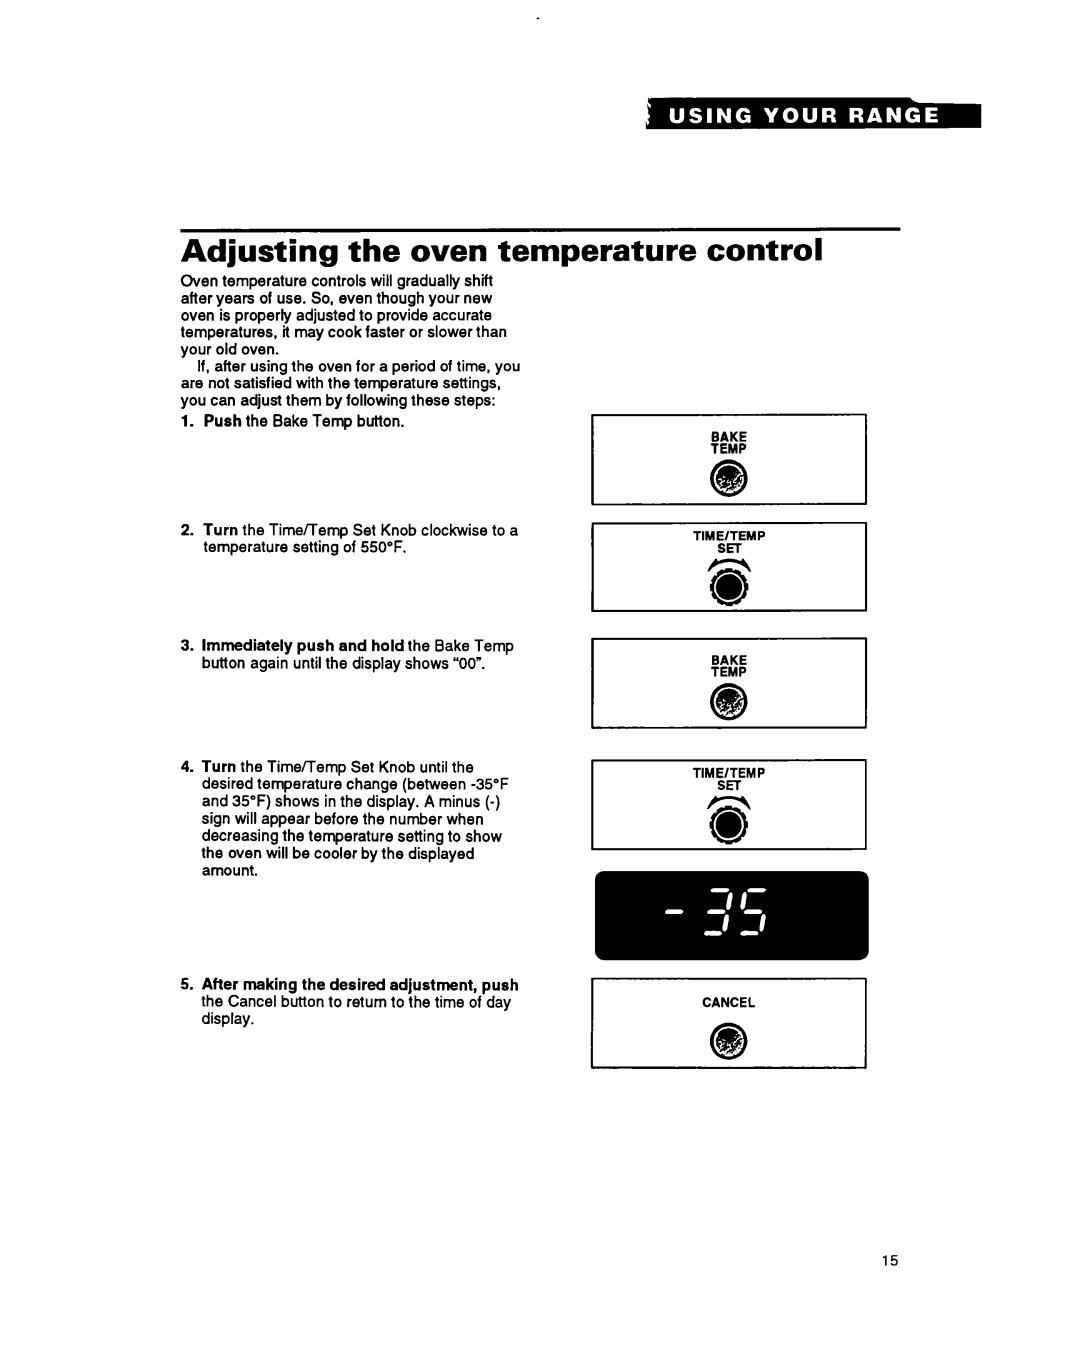 Whirlpool FGS395Y important safety instructions Adjusting the oven temperature, control 